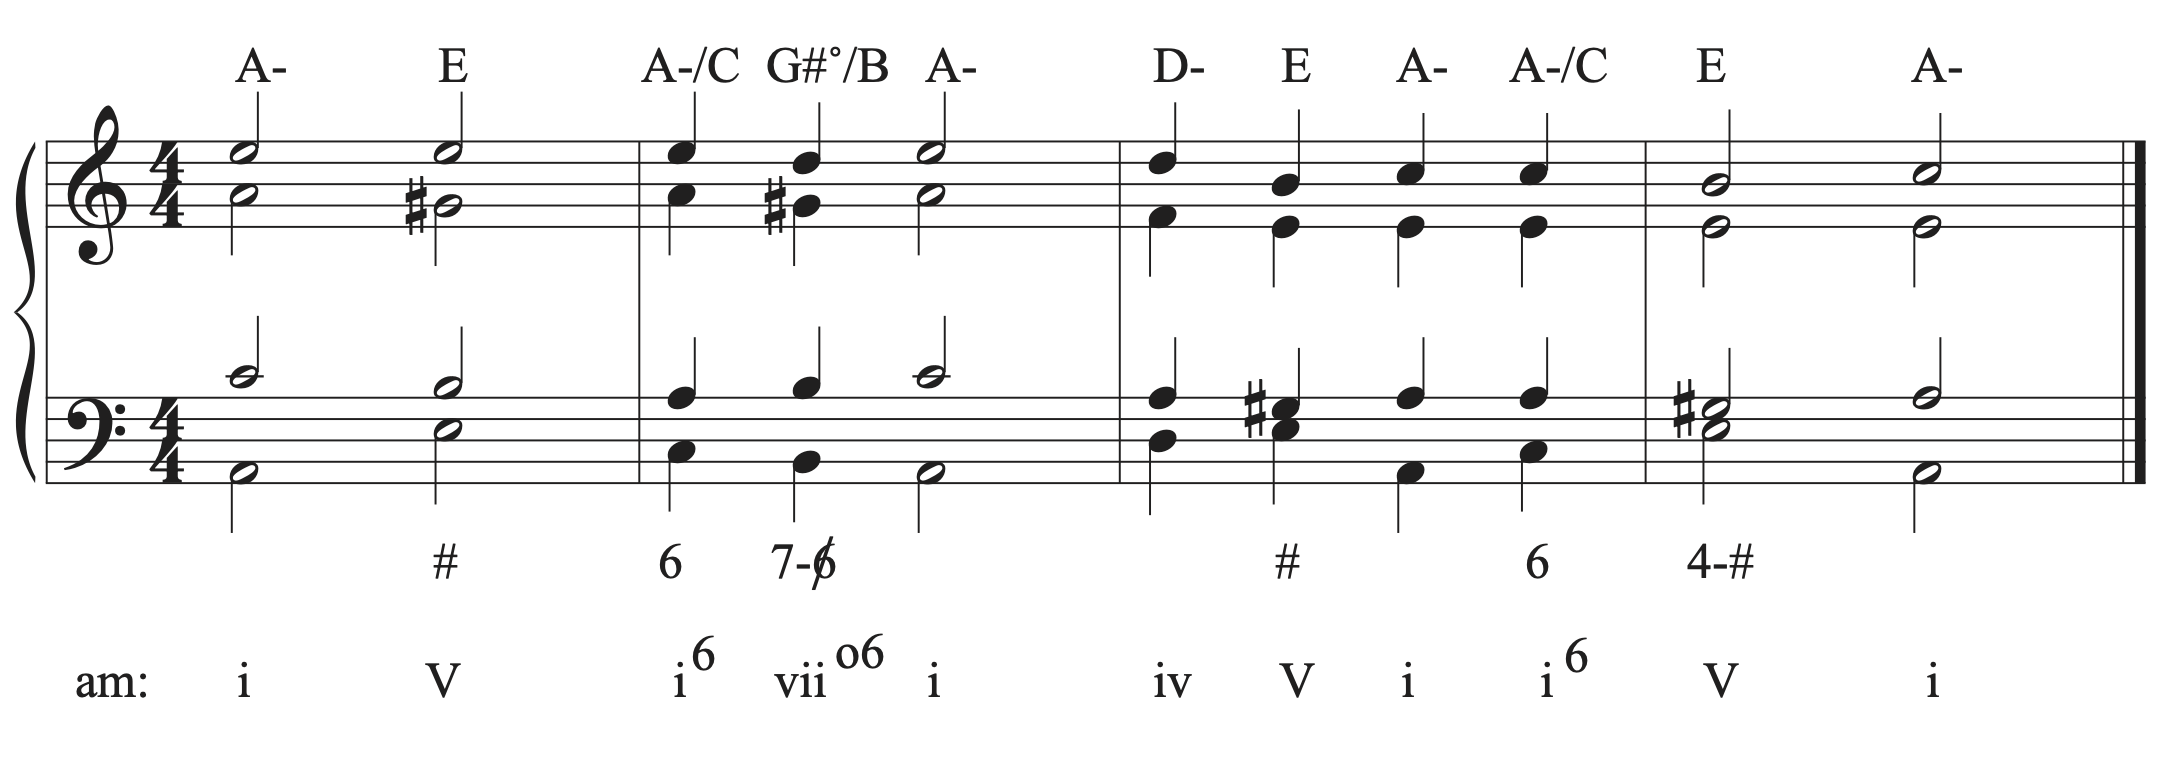 A four-bar musical example in A minor with Roman Numerals, figured bass, and lead sheet symbols.